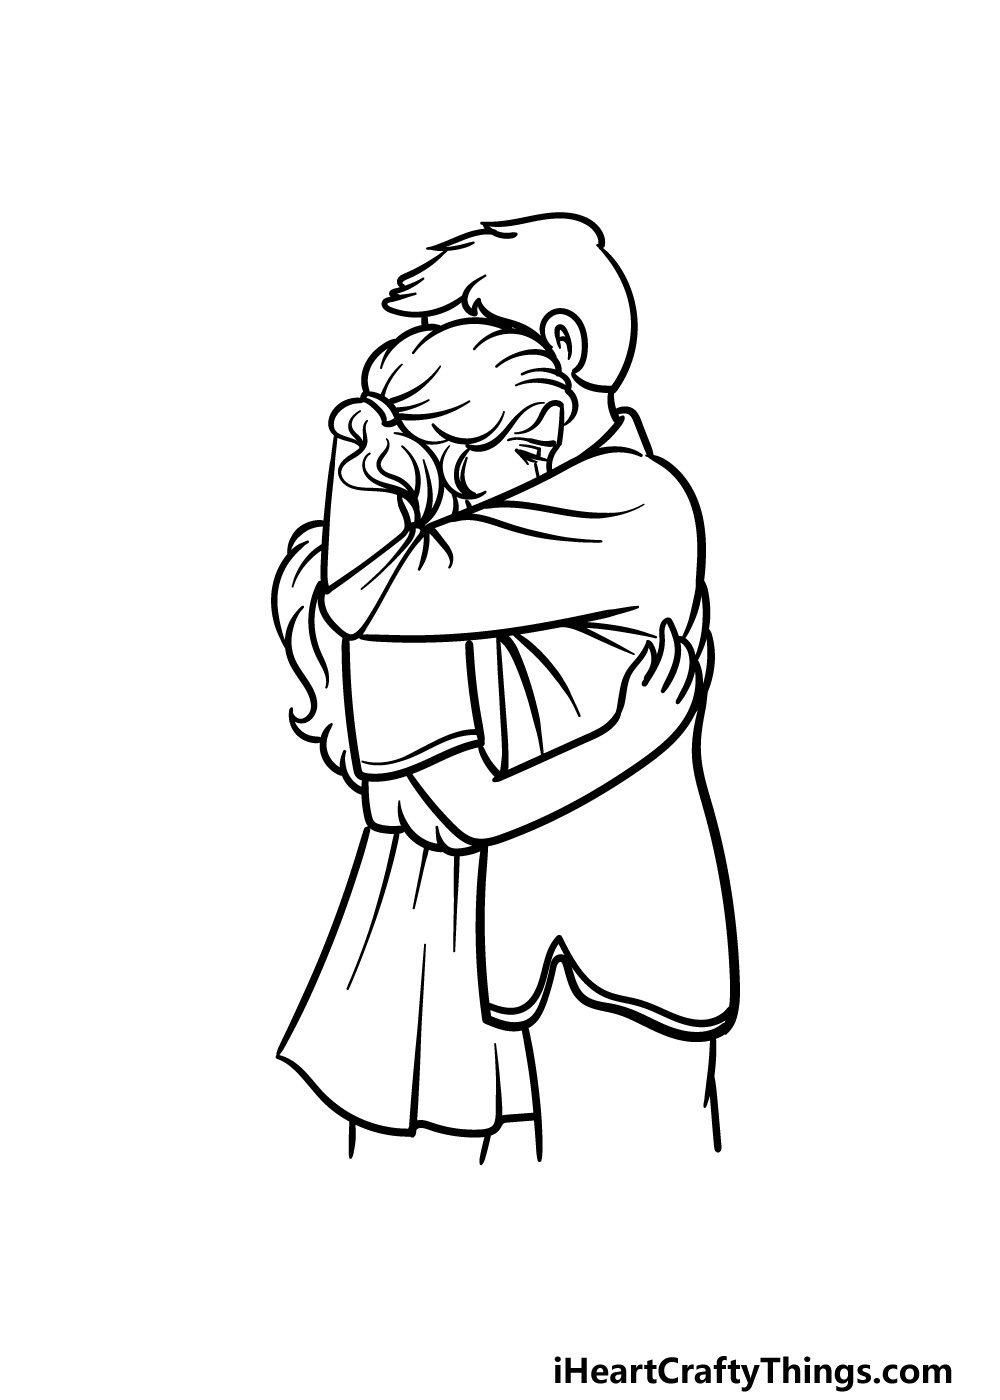 how to draw people hugging step 5